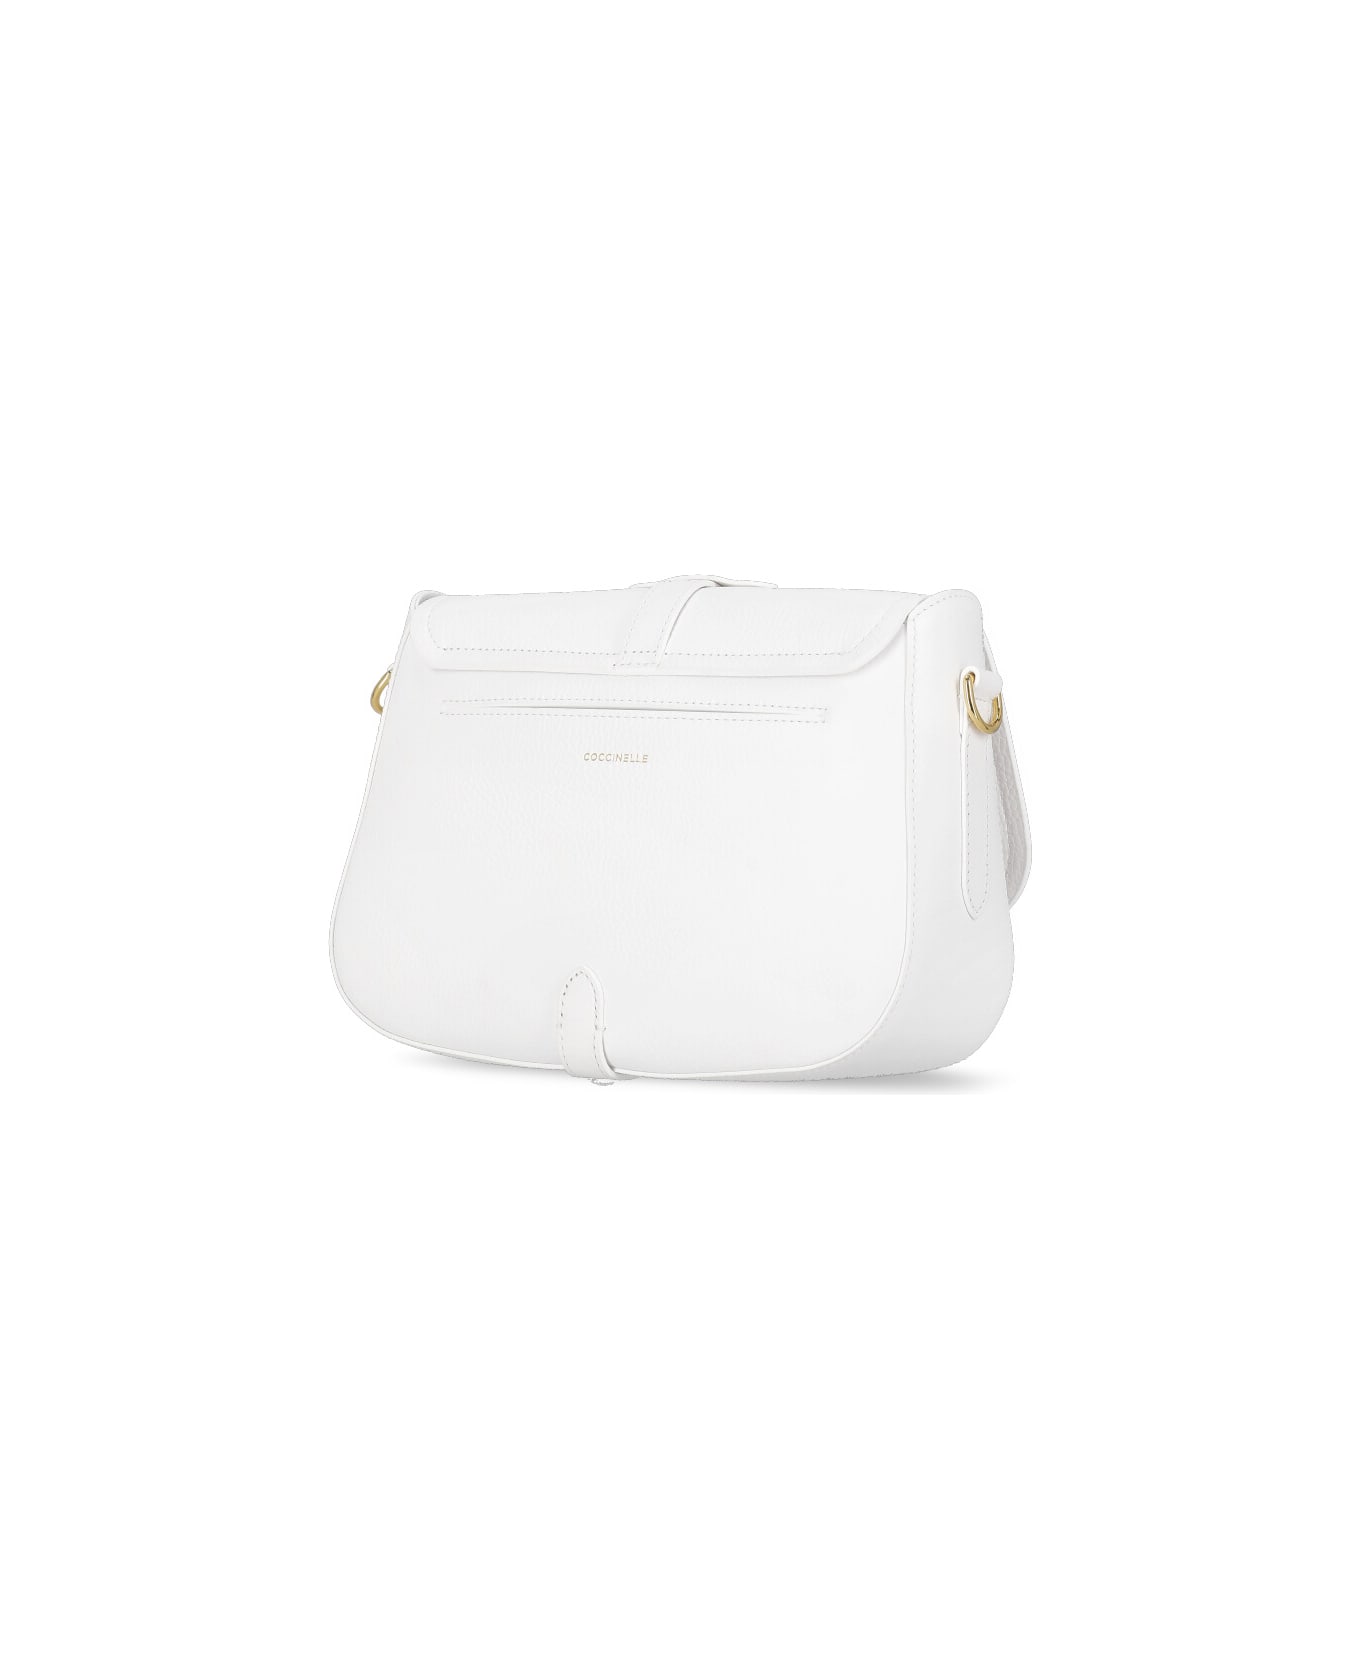 Coccinelle Magalu Bag - White